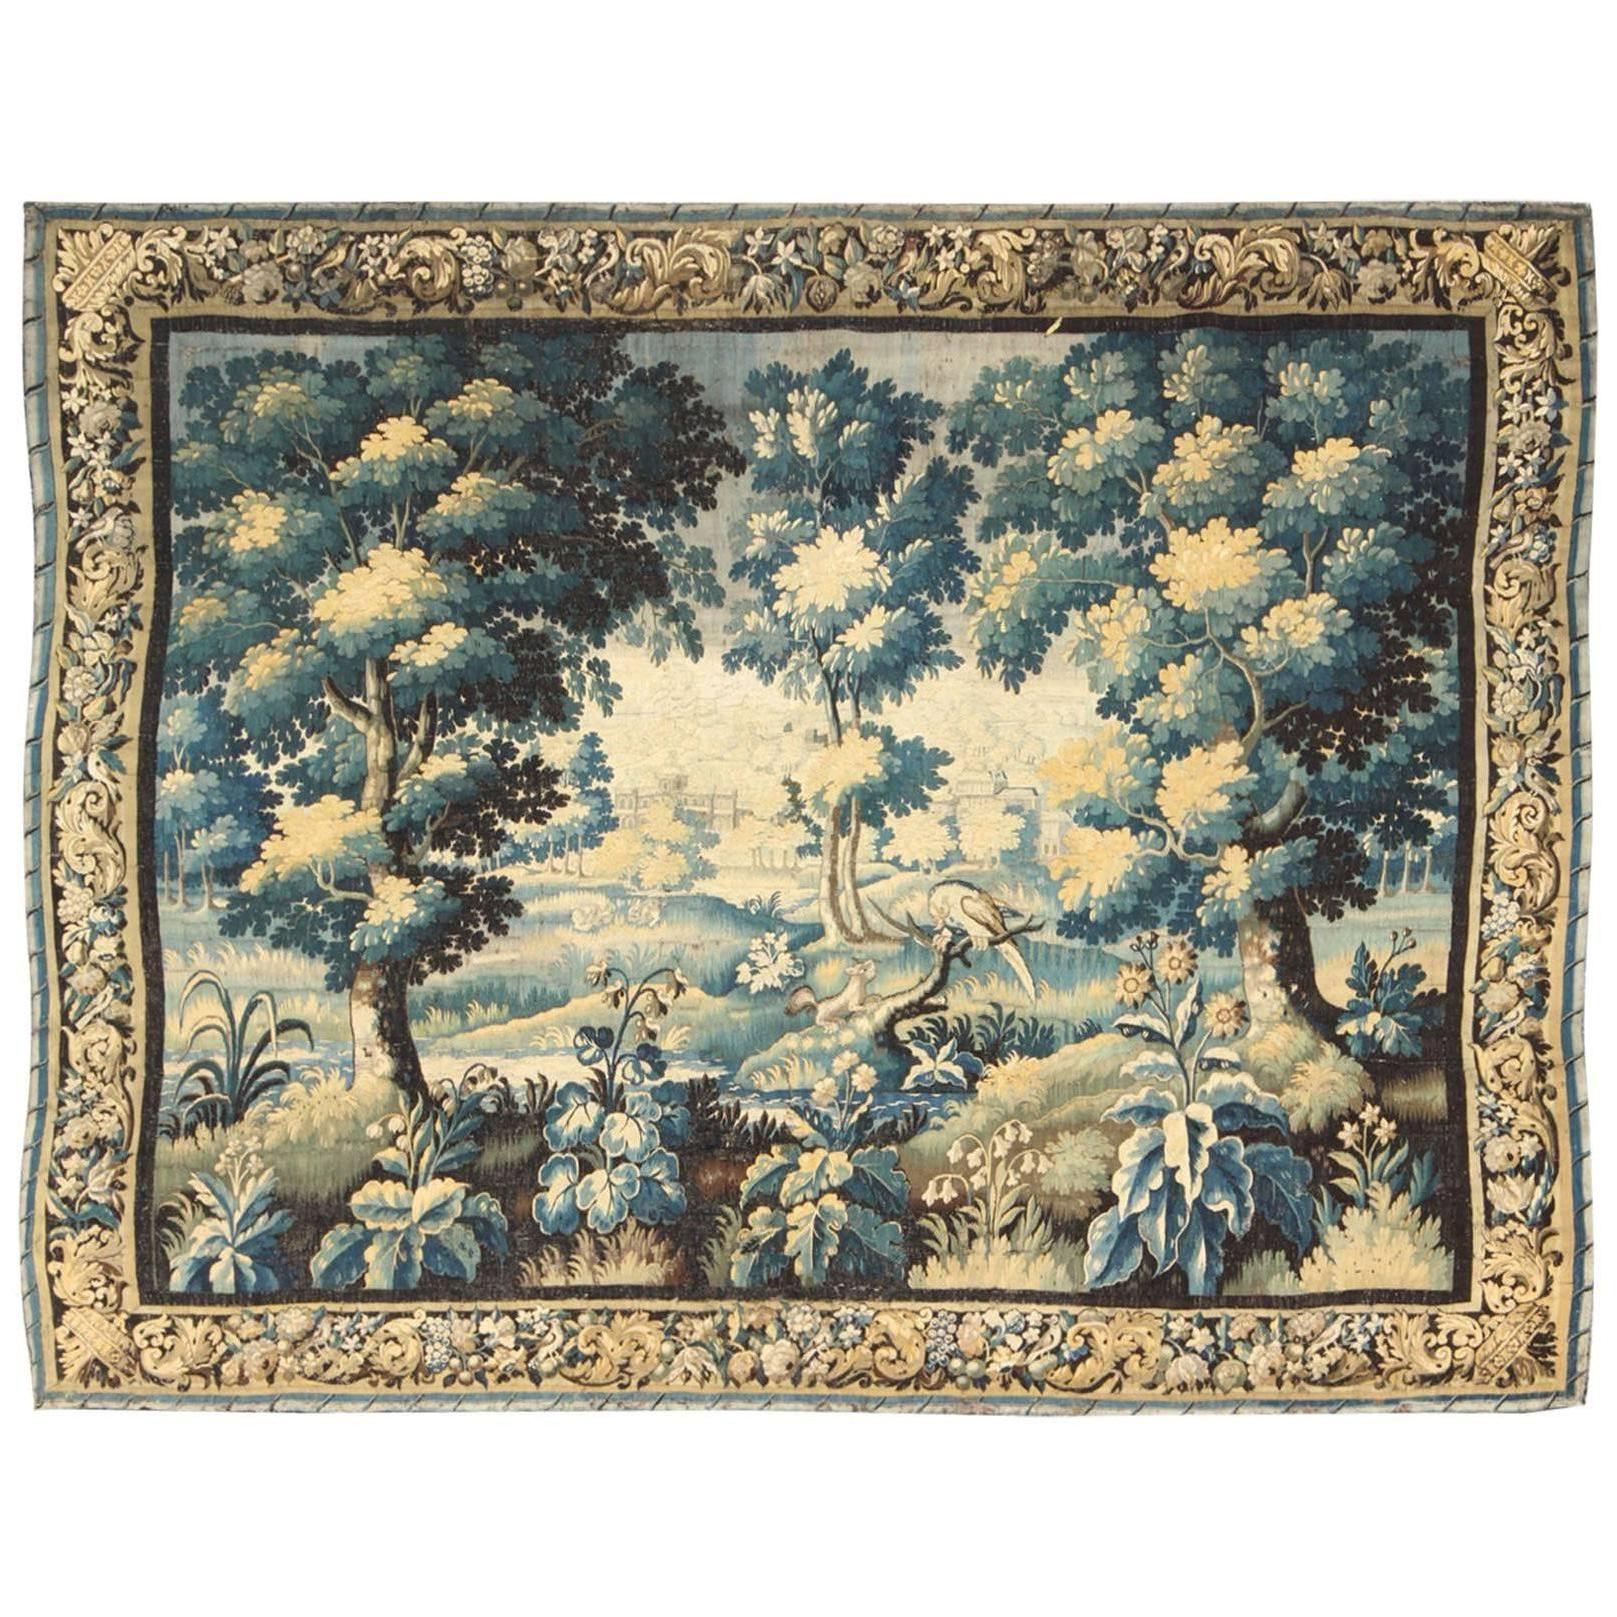 17th Century Antique Tapestry with Woodland Scene and Floral Border in Blue Tone